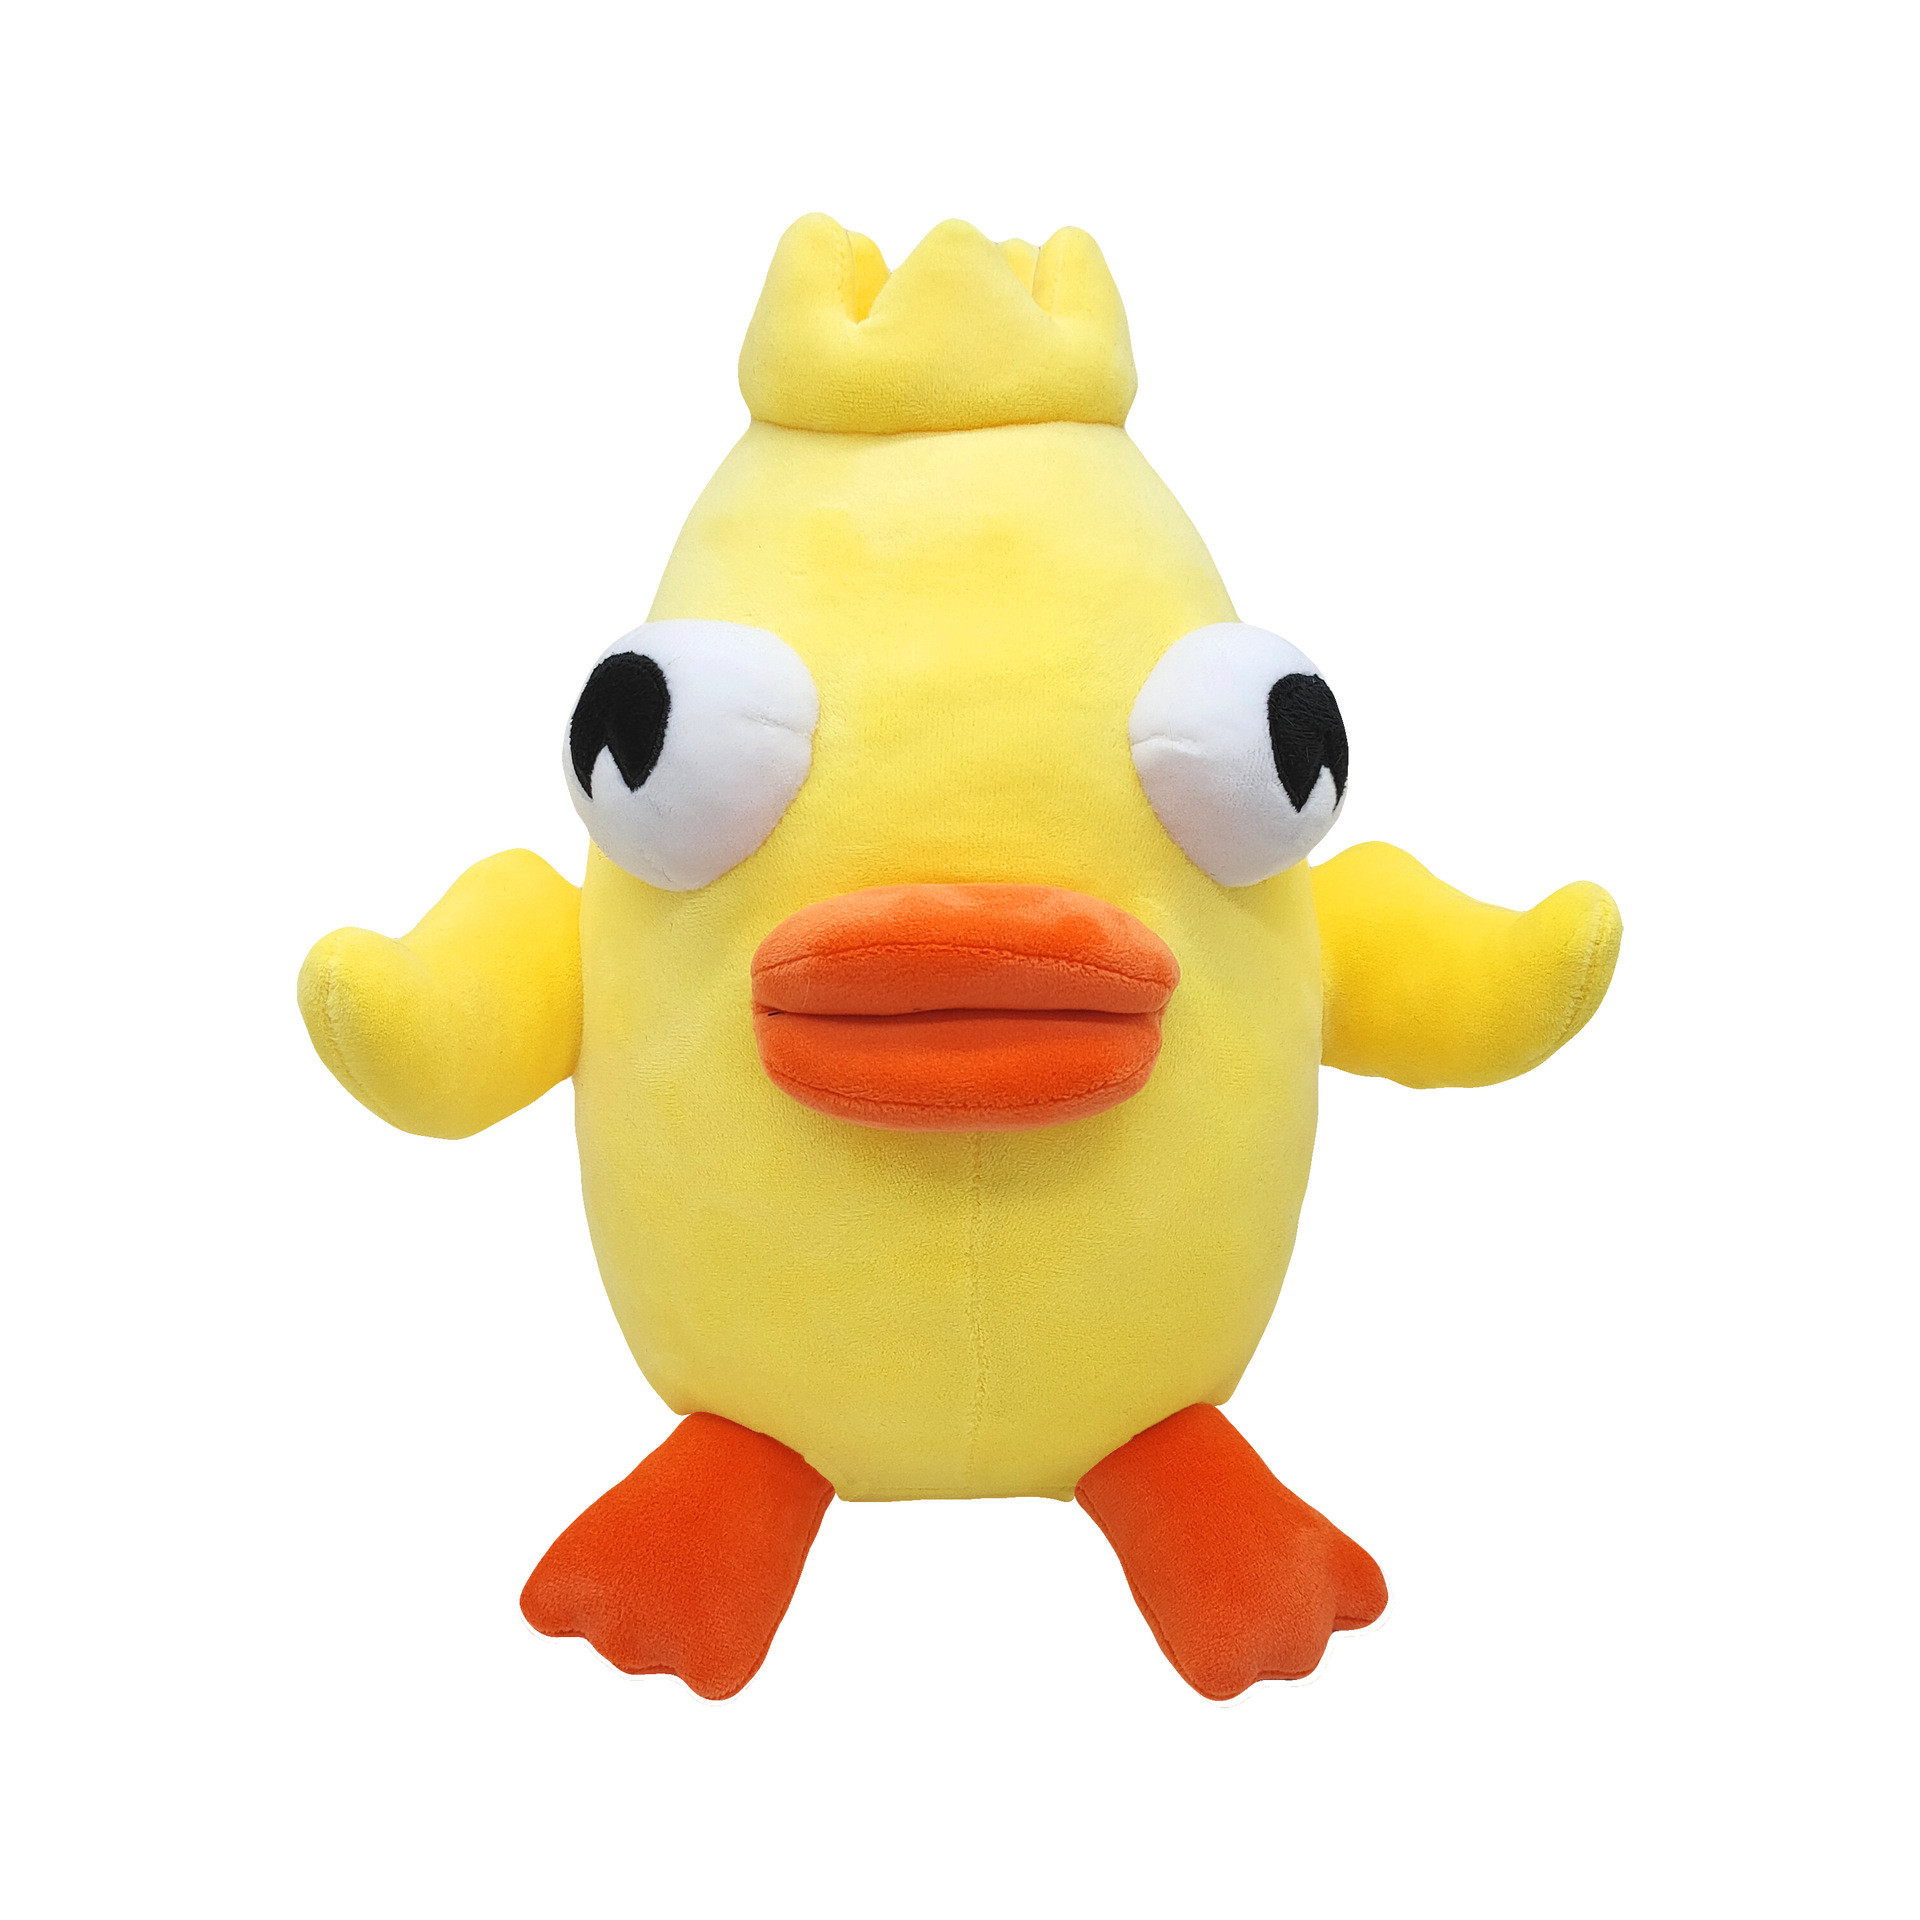 Ducky Momo From Phineas And Ferb Plush Toy